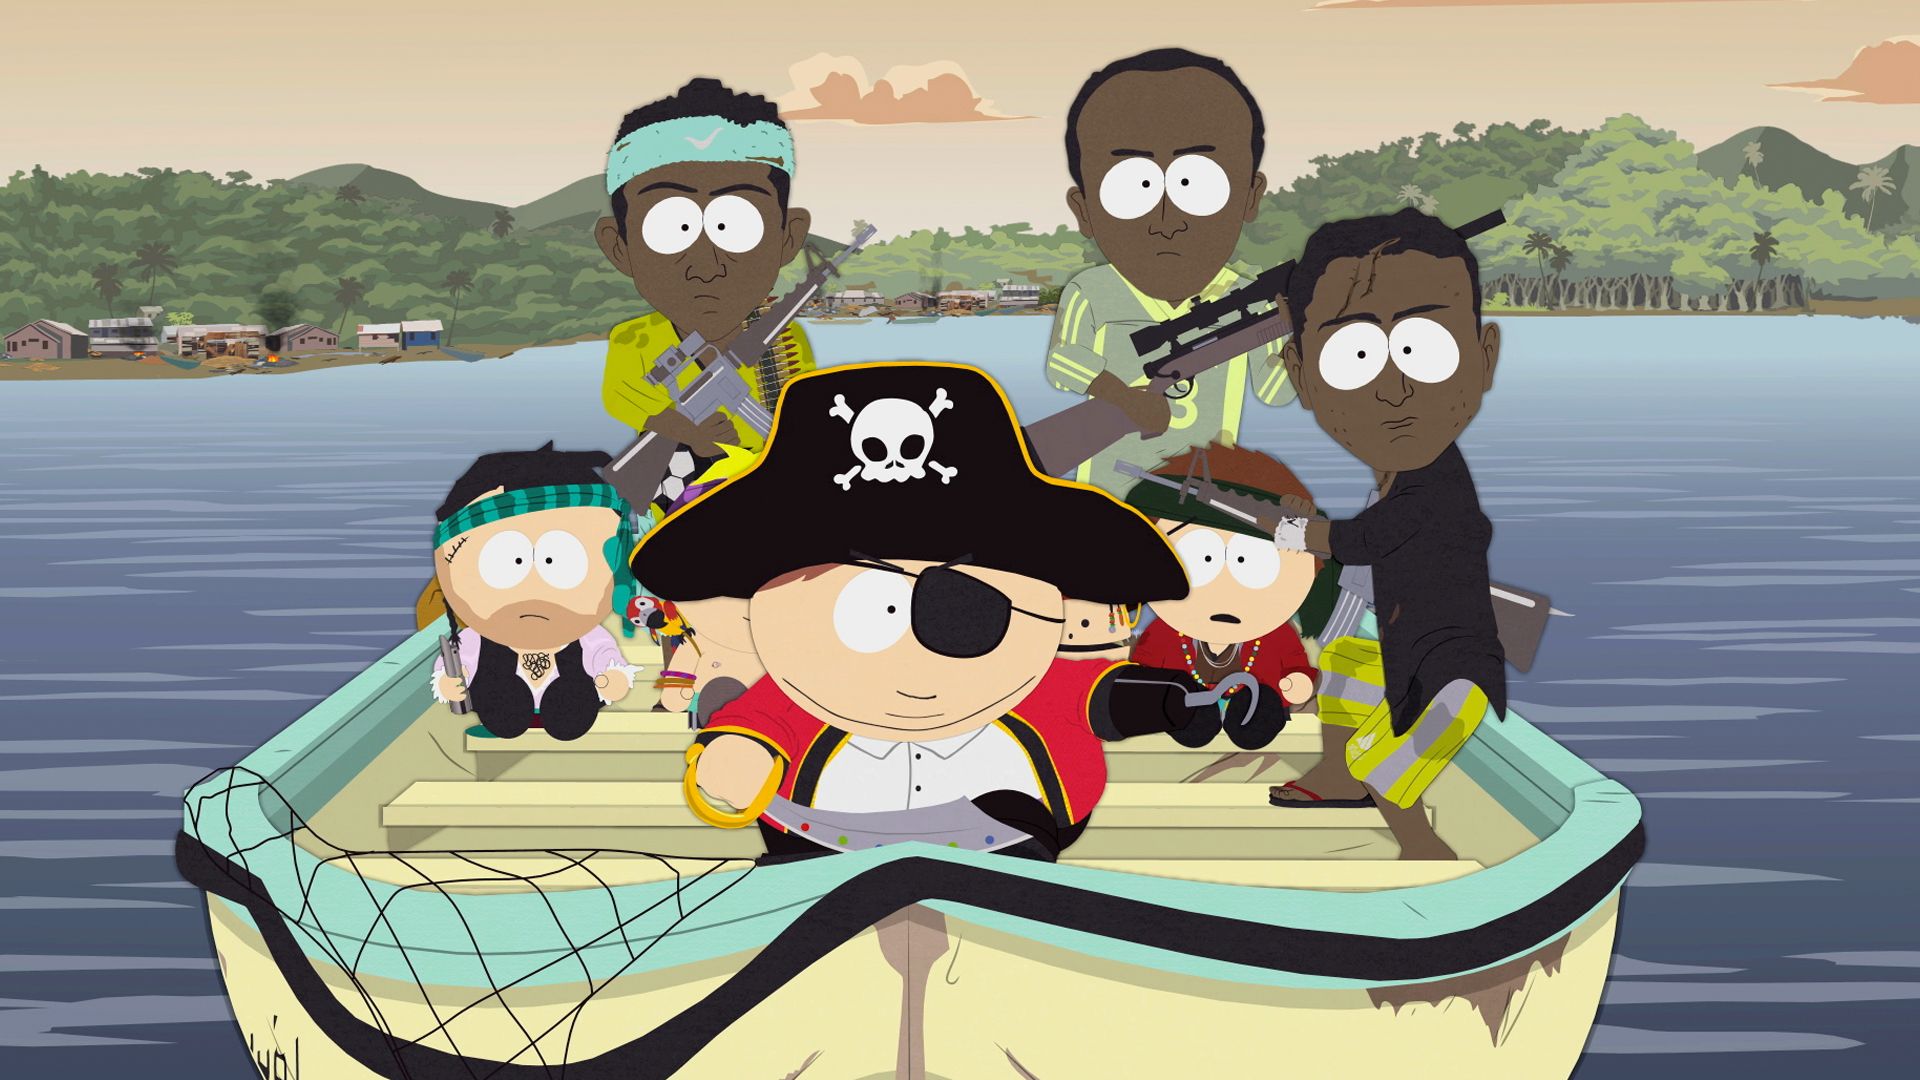 THIS Is Your Pirate Boat? - Seizoen 13 Aflevering 7 - South Park